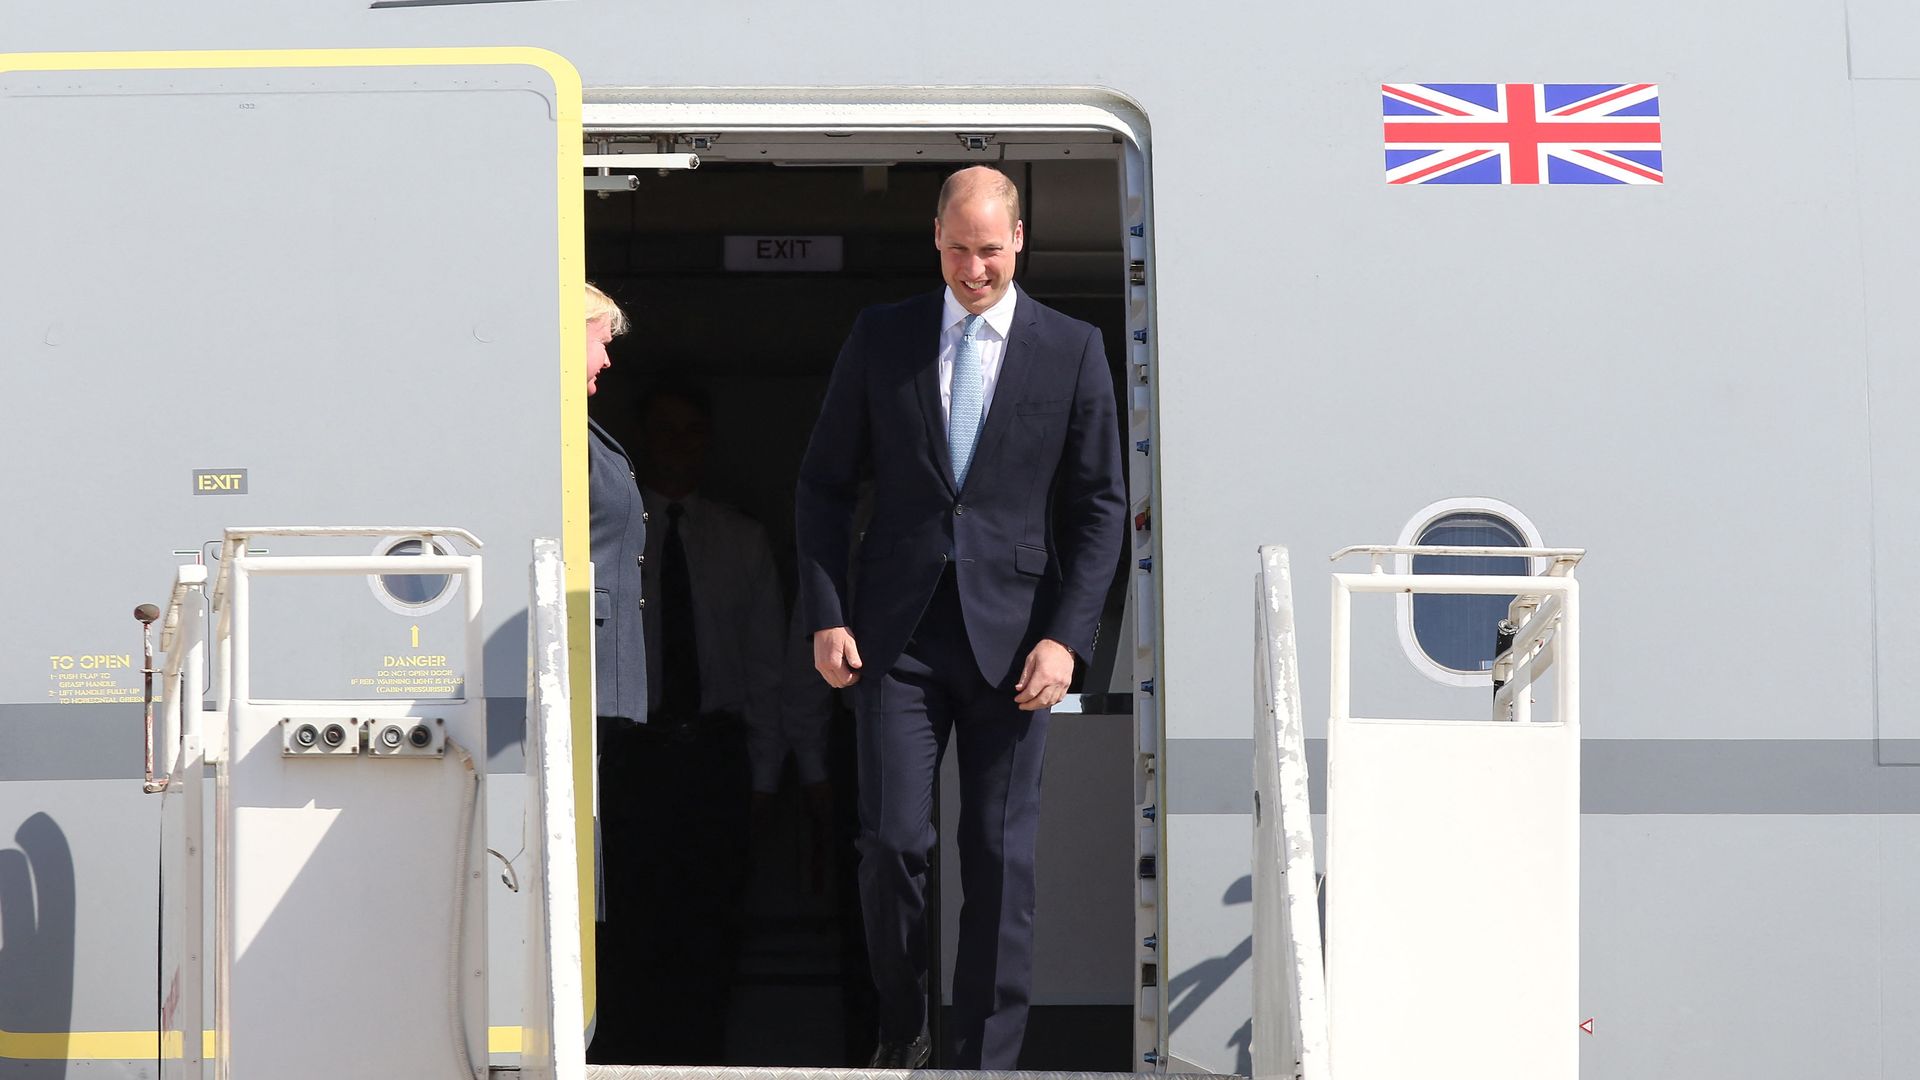 Prince William disembarking from a plane